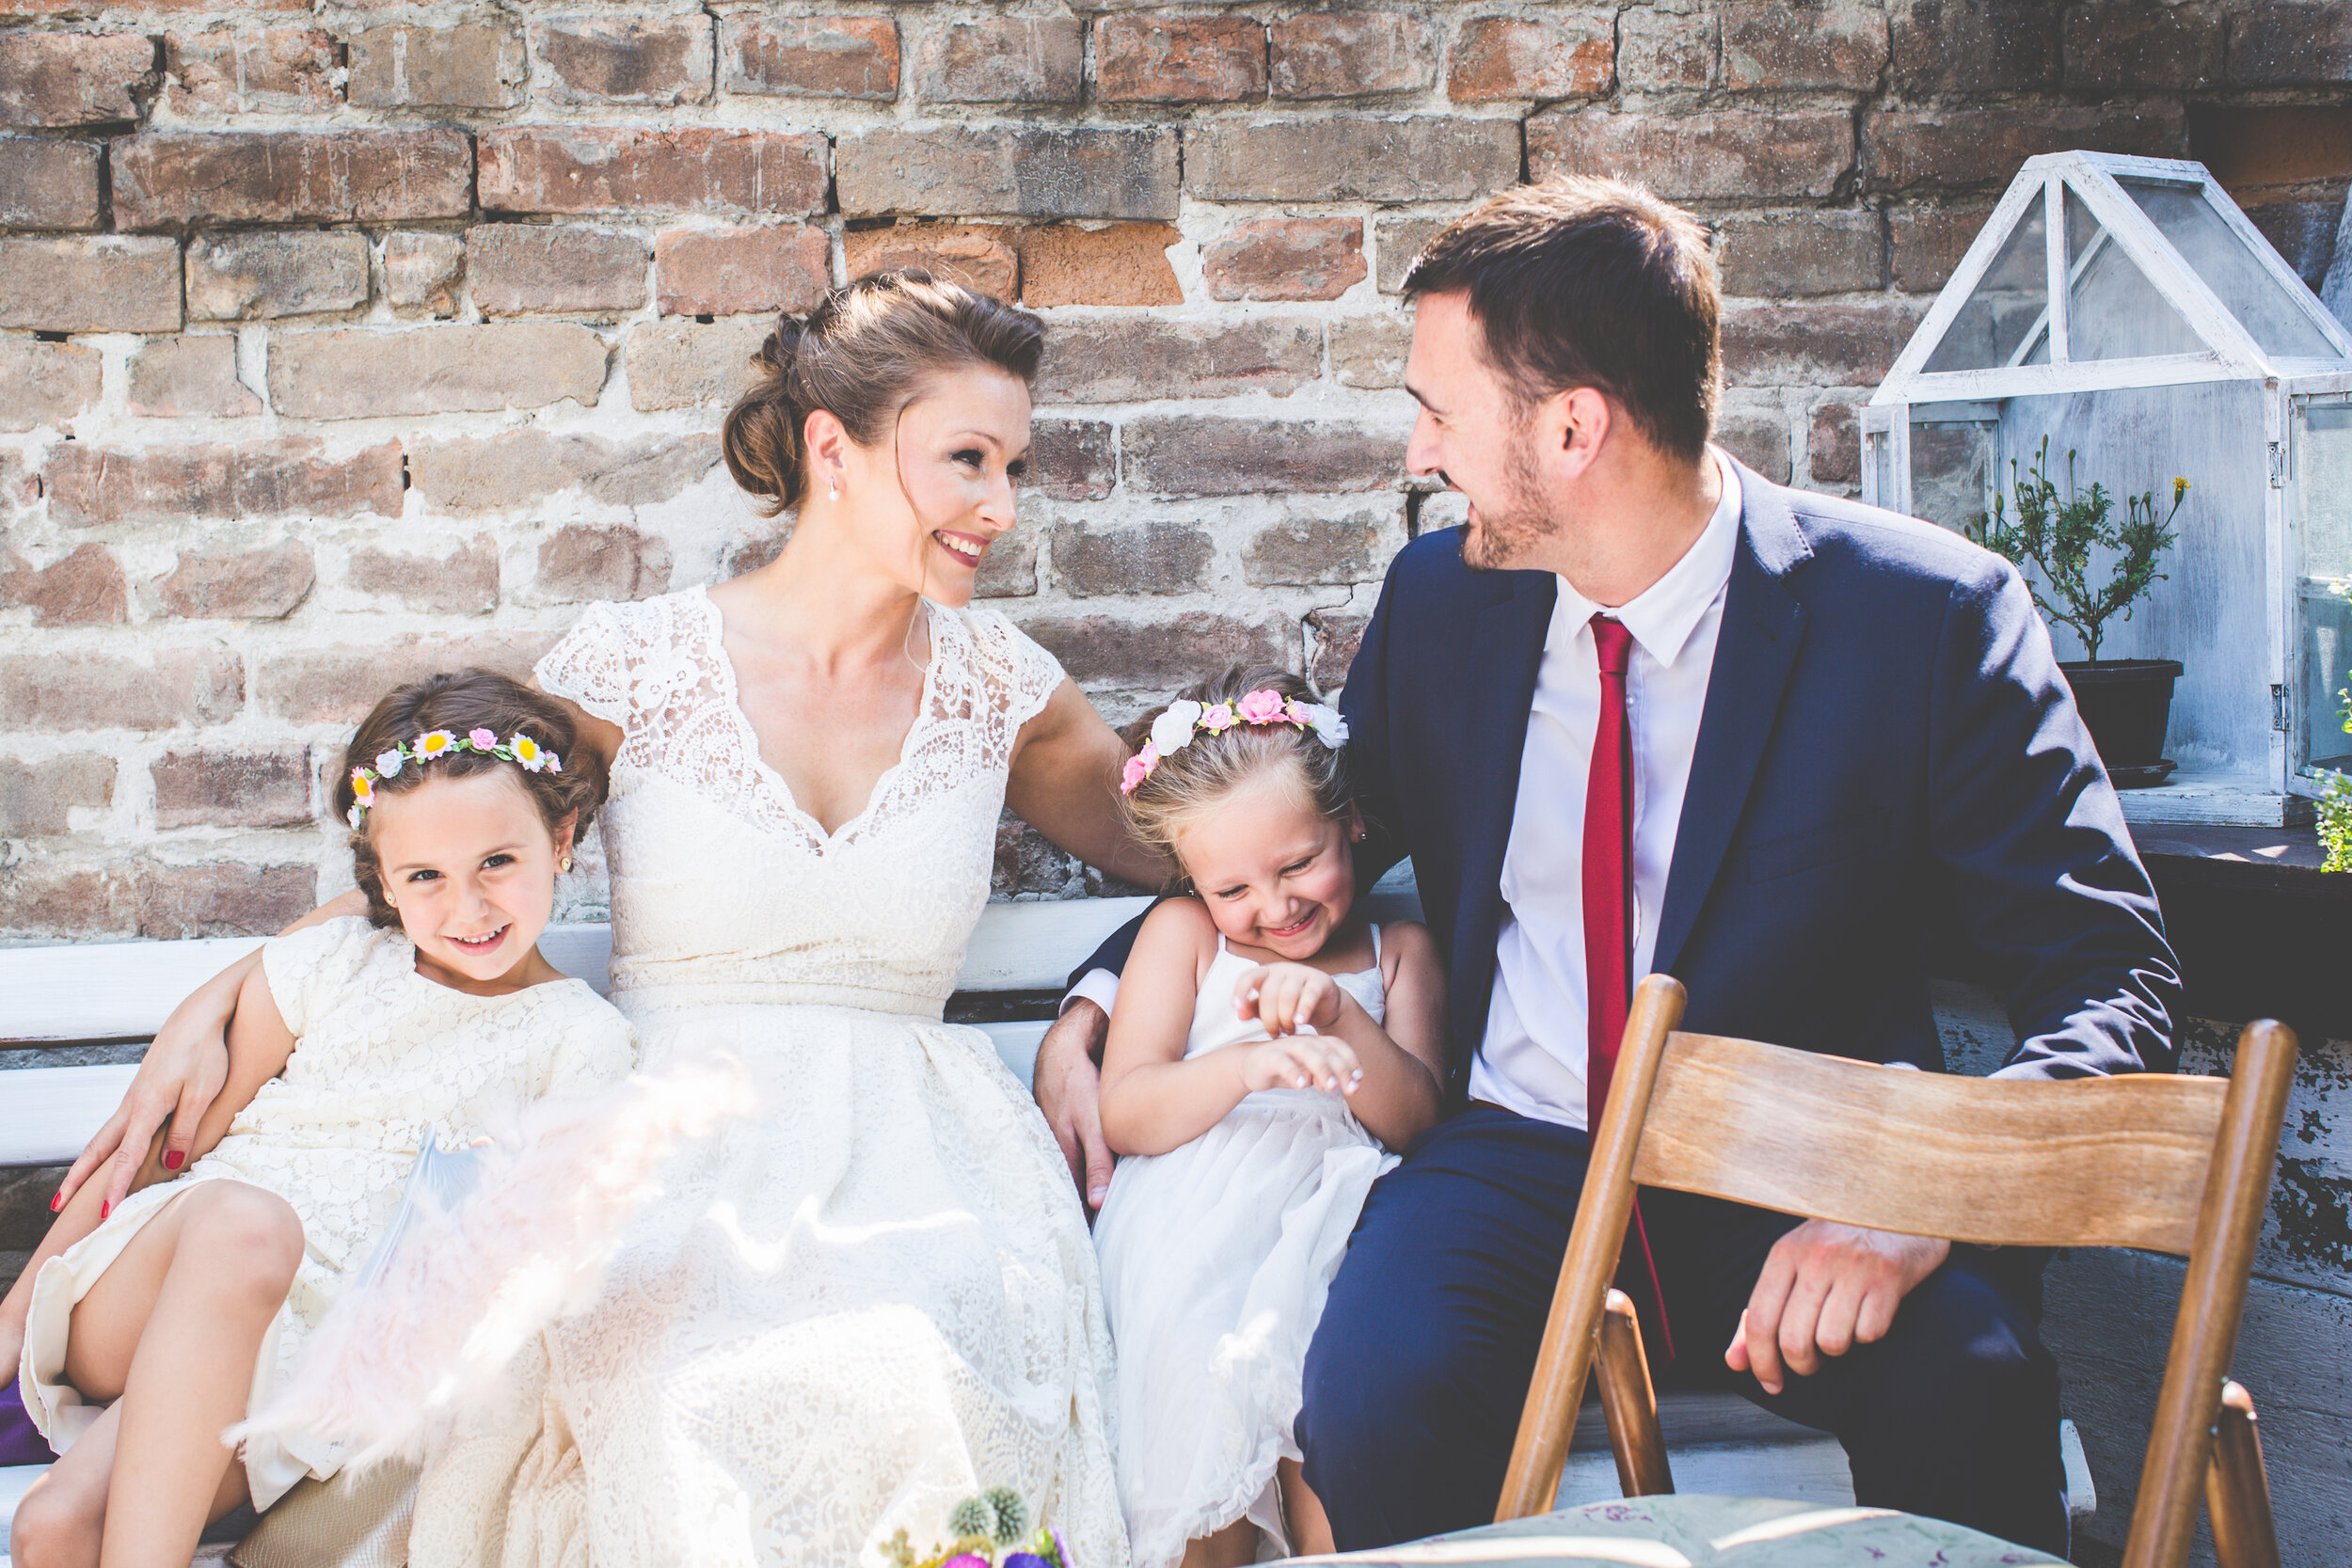 Flower Girl Guide: Tips for the Big Day